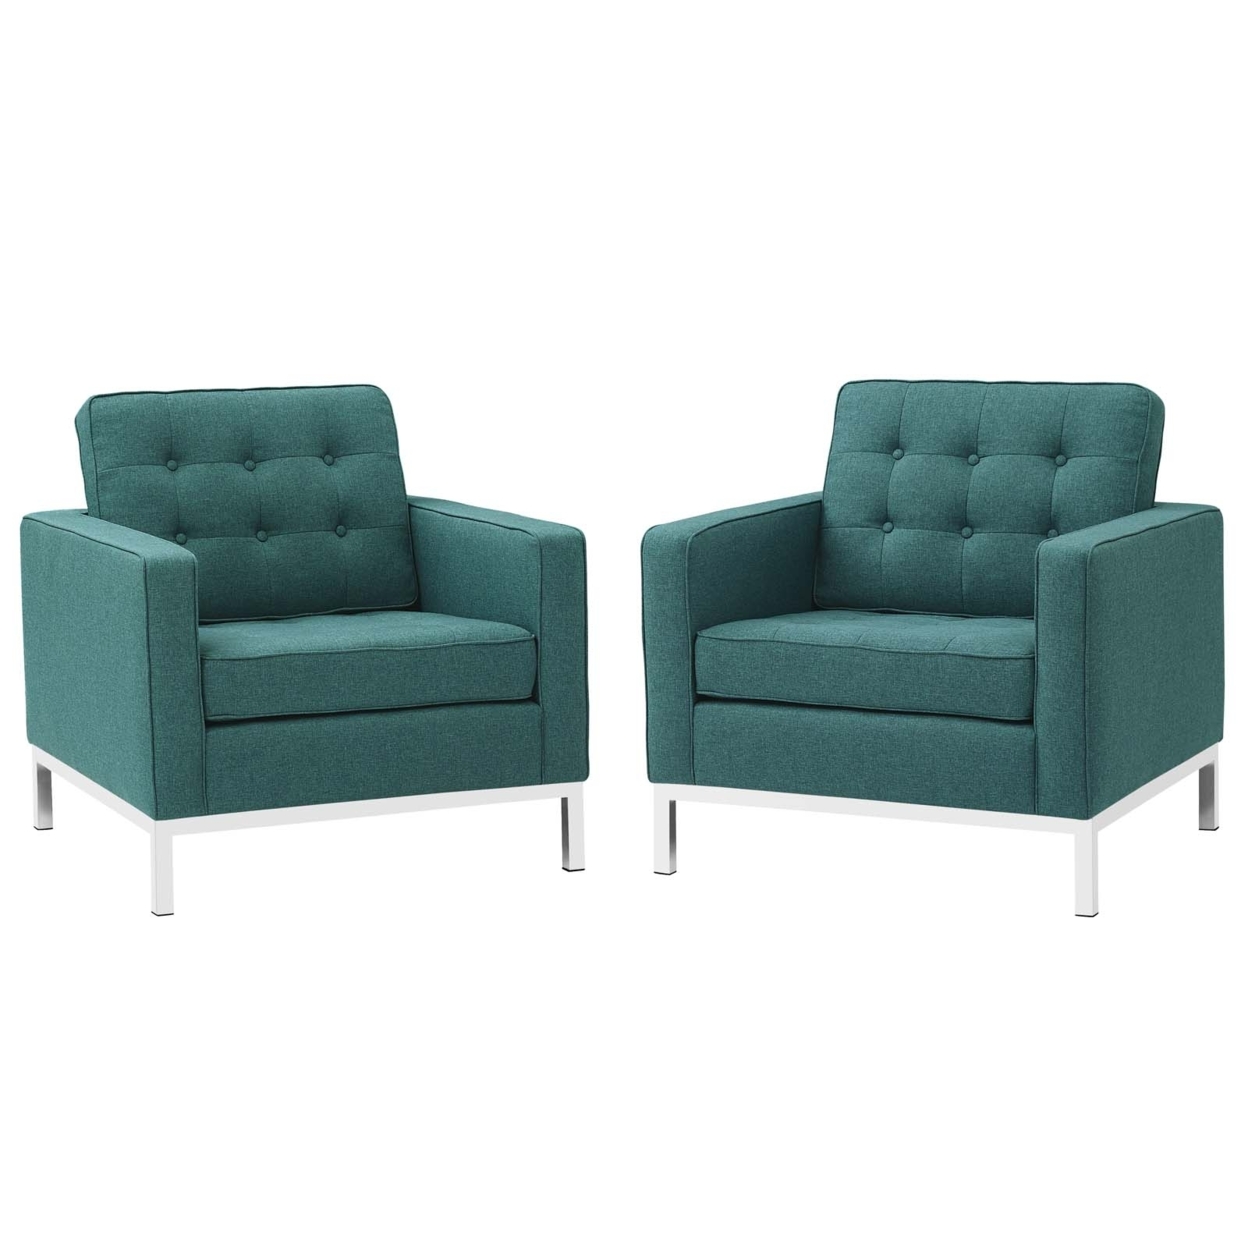 Loft Armchairs Upholstered Fabric Set Of 2, Teal